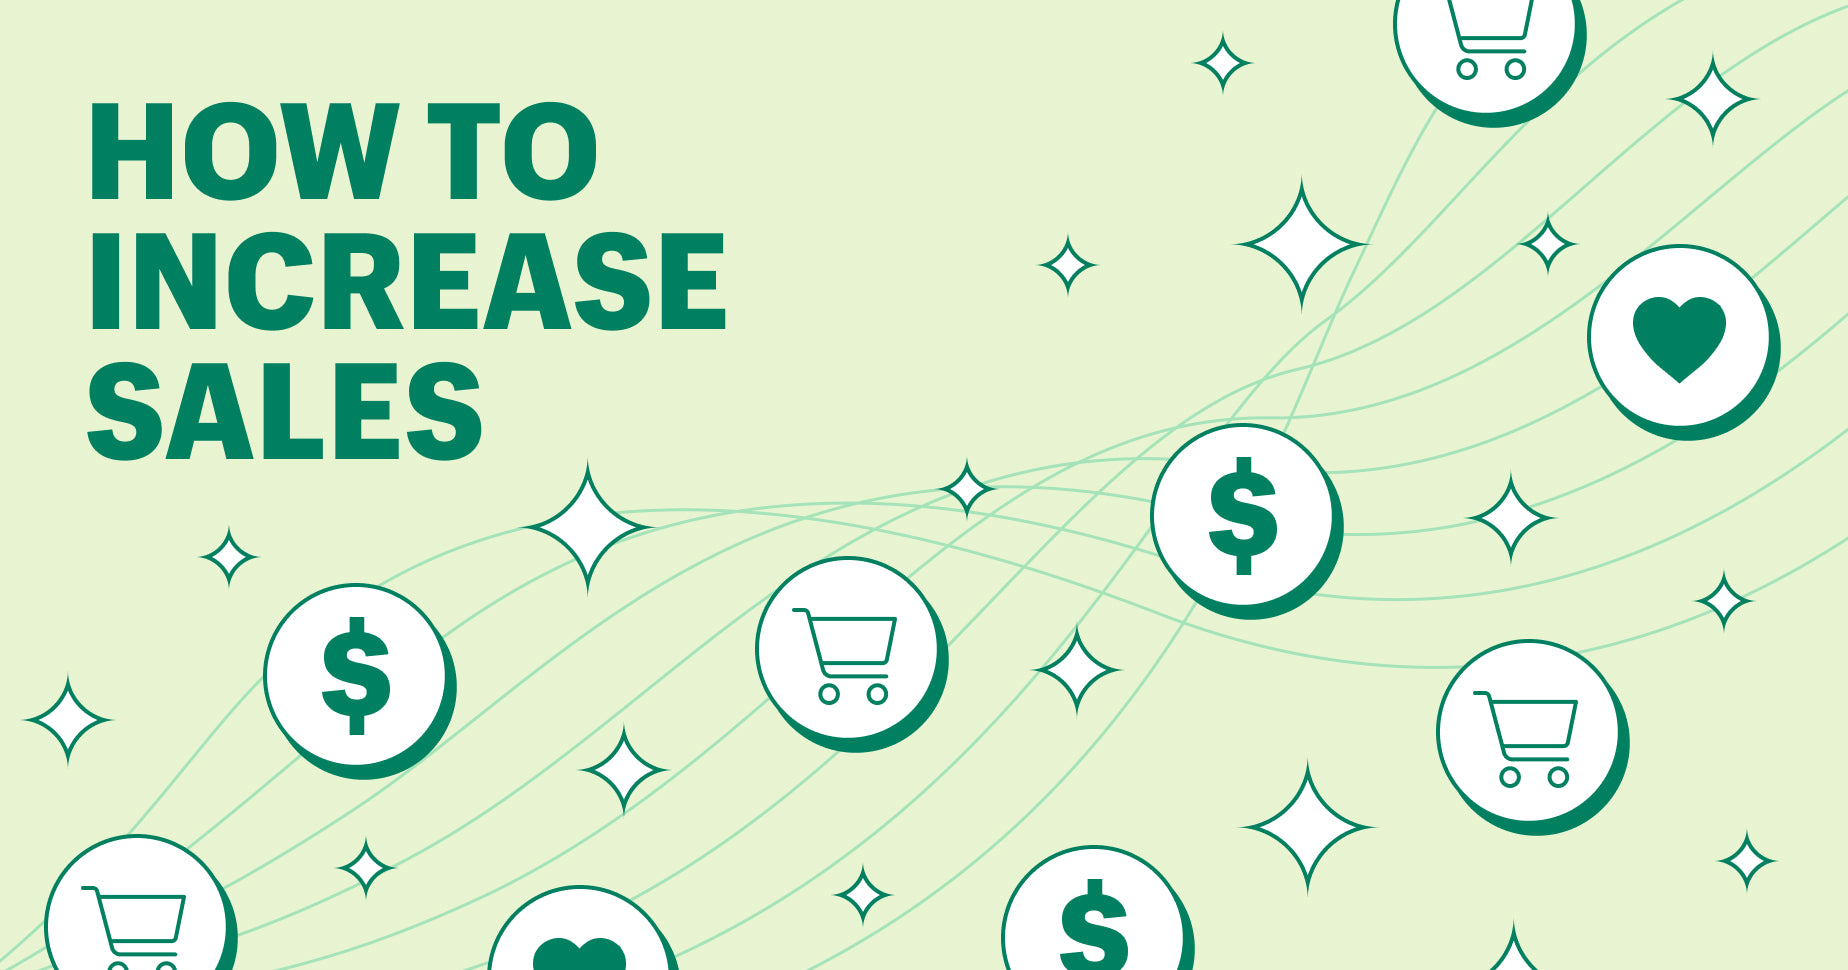 Graphic that says "how to increase sales" in the top left. Underneath are icons of a shopping cart and a dollar sign repeated in a staggered pattern.